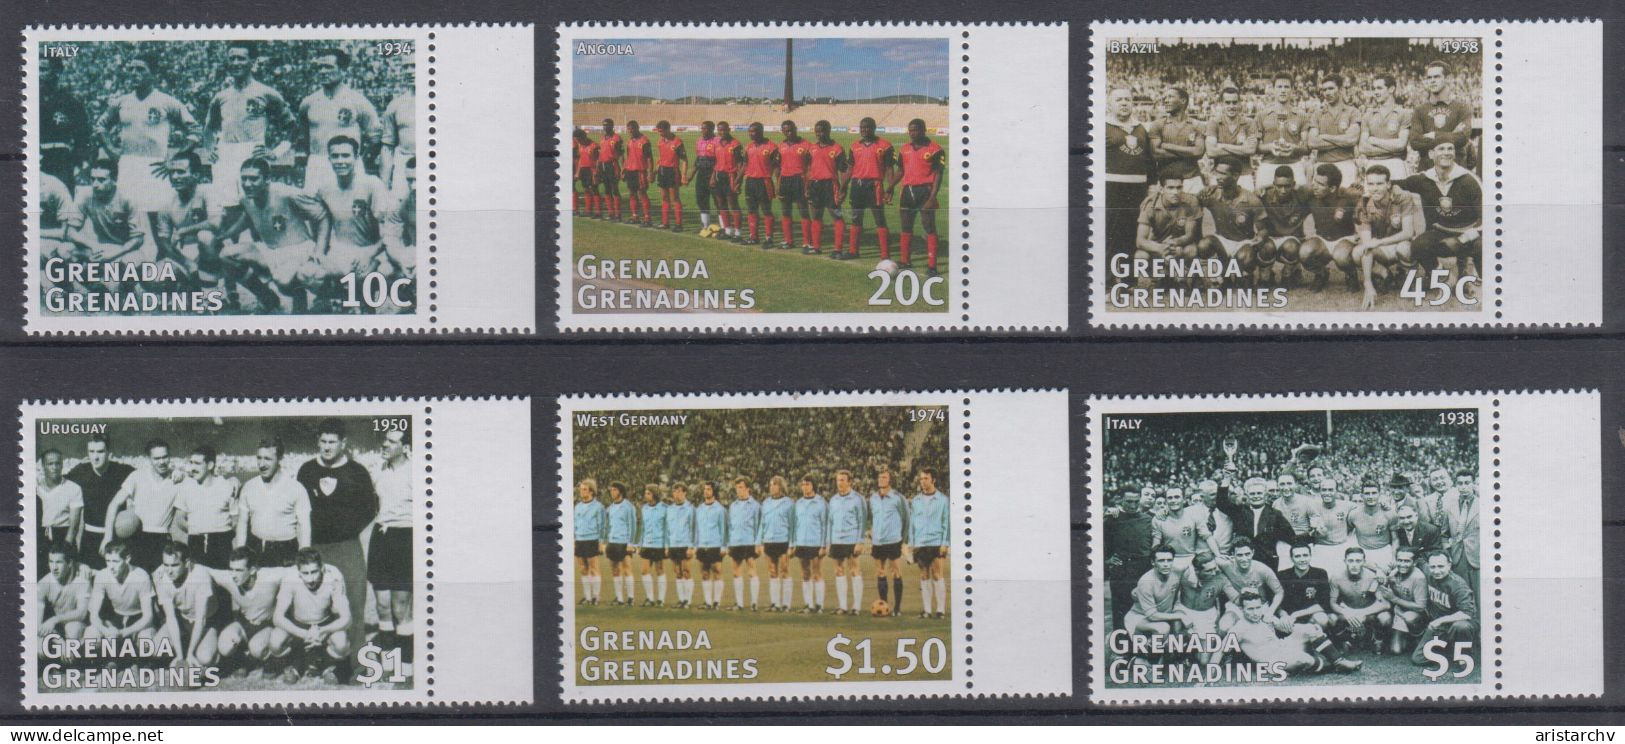 GRENADA GRENADINES 1998 FOOTBALL WORLD CUP 2 S/SHEETS 2 SHEETLETS AND 6 STAMPS - 1998 – Frankreich